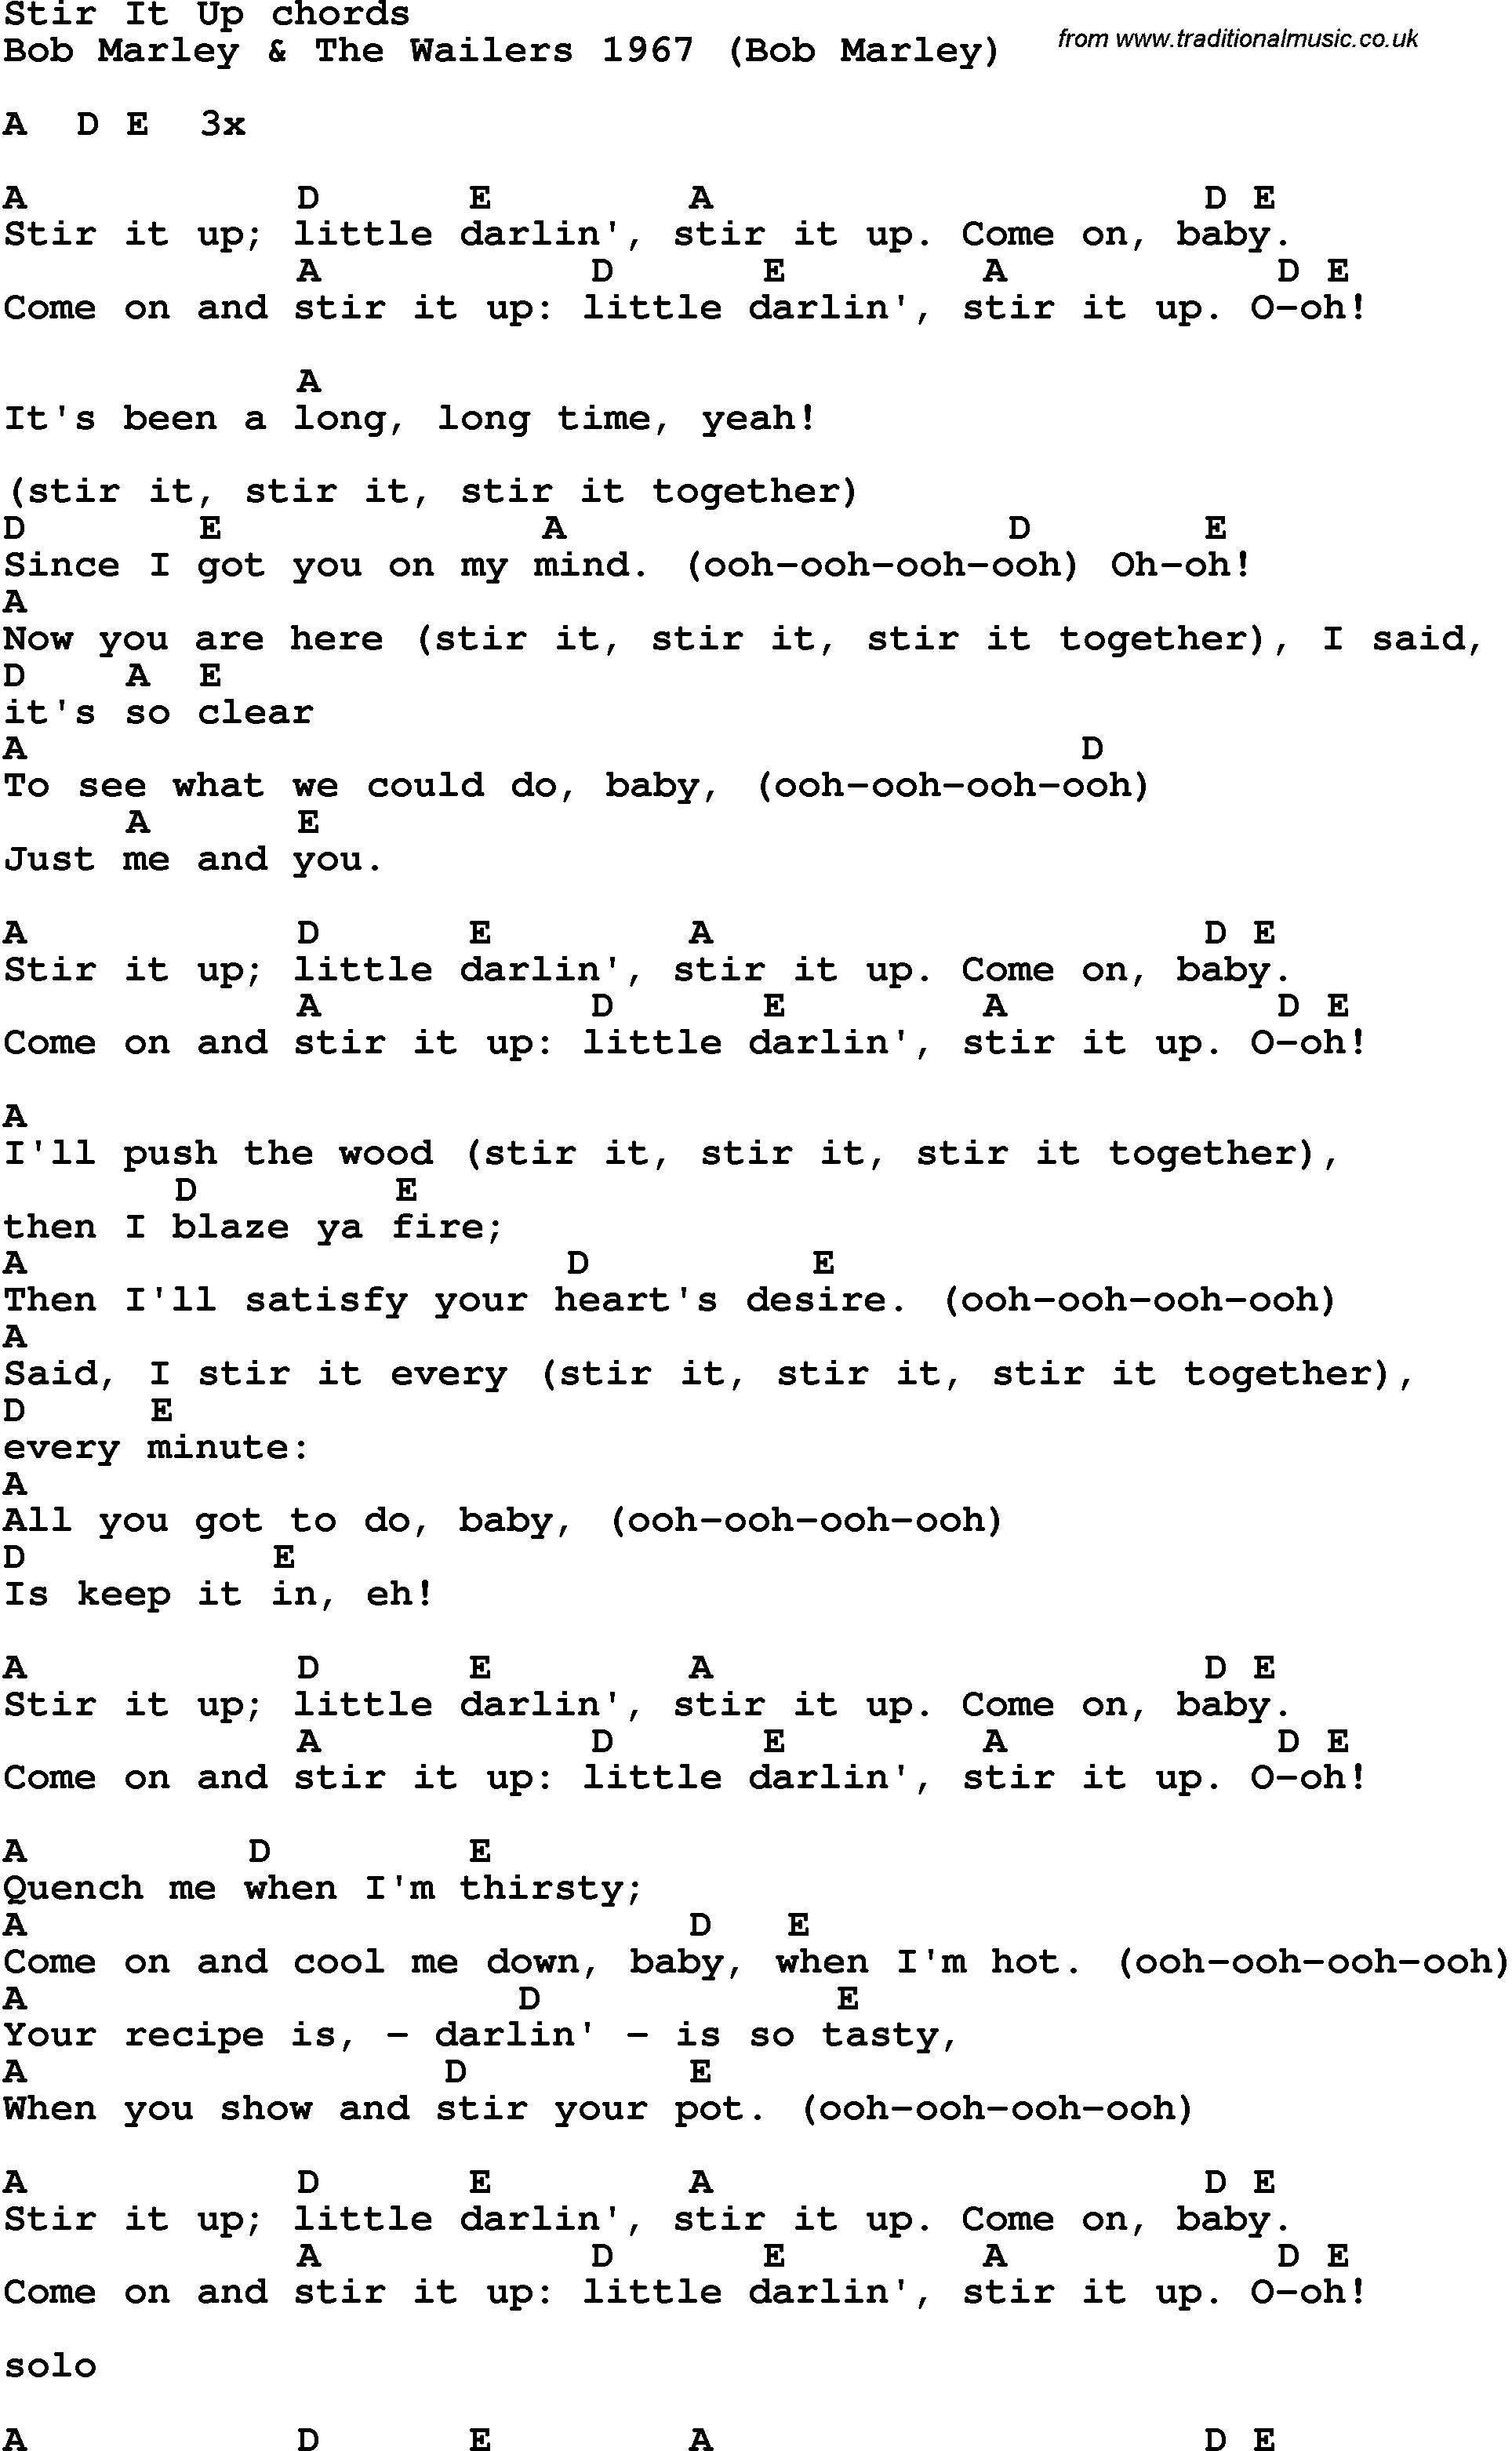 Song Lyrics with guitar chords for Stir It Up